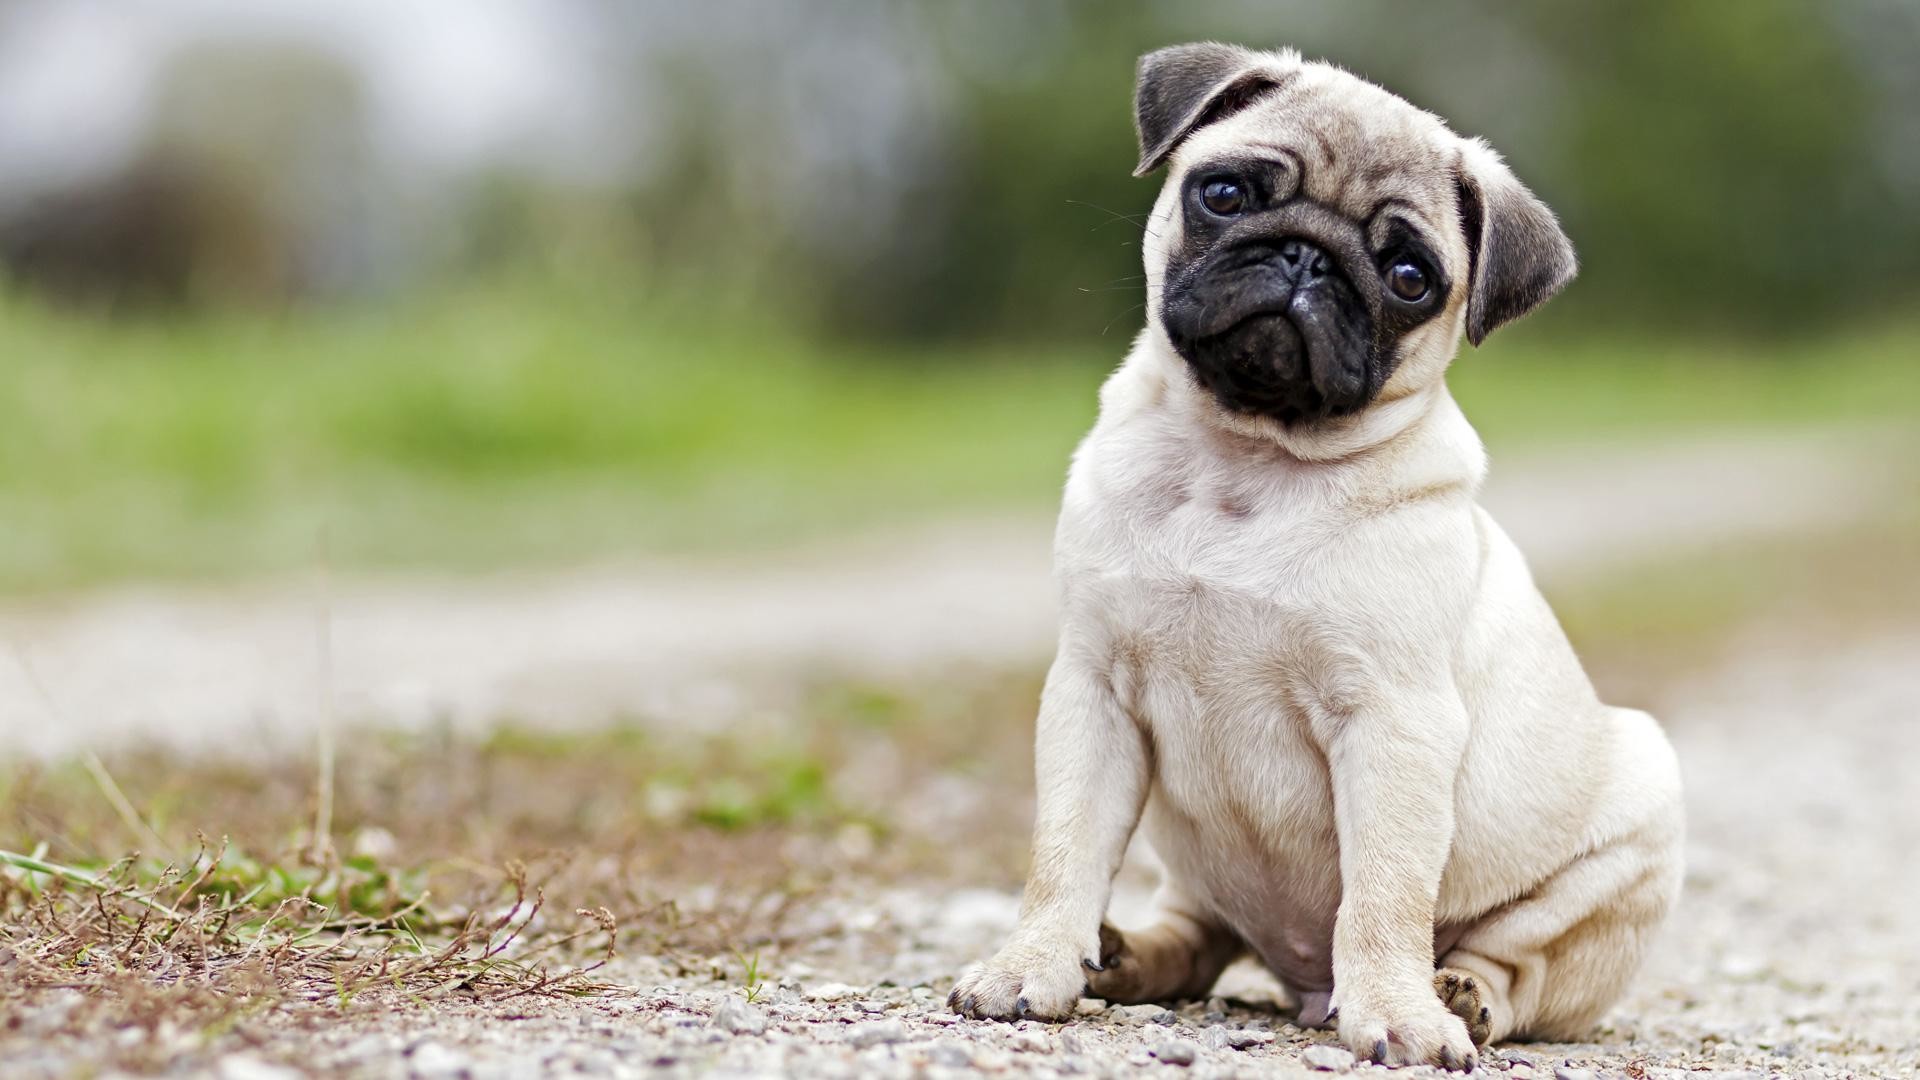 1920x1080 What Are The Characteristics of a Pug Puppy and Dog? - http://